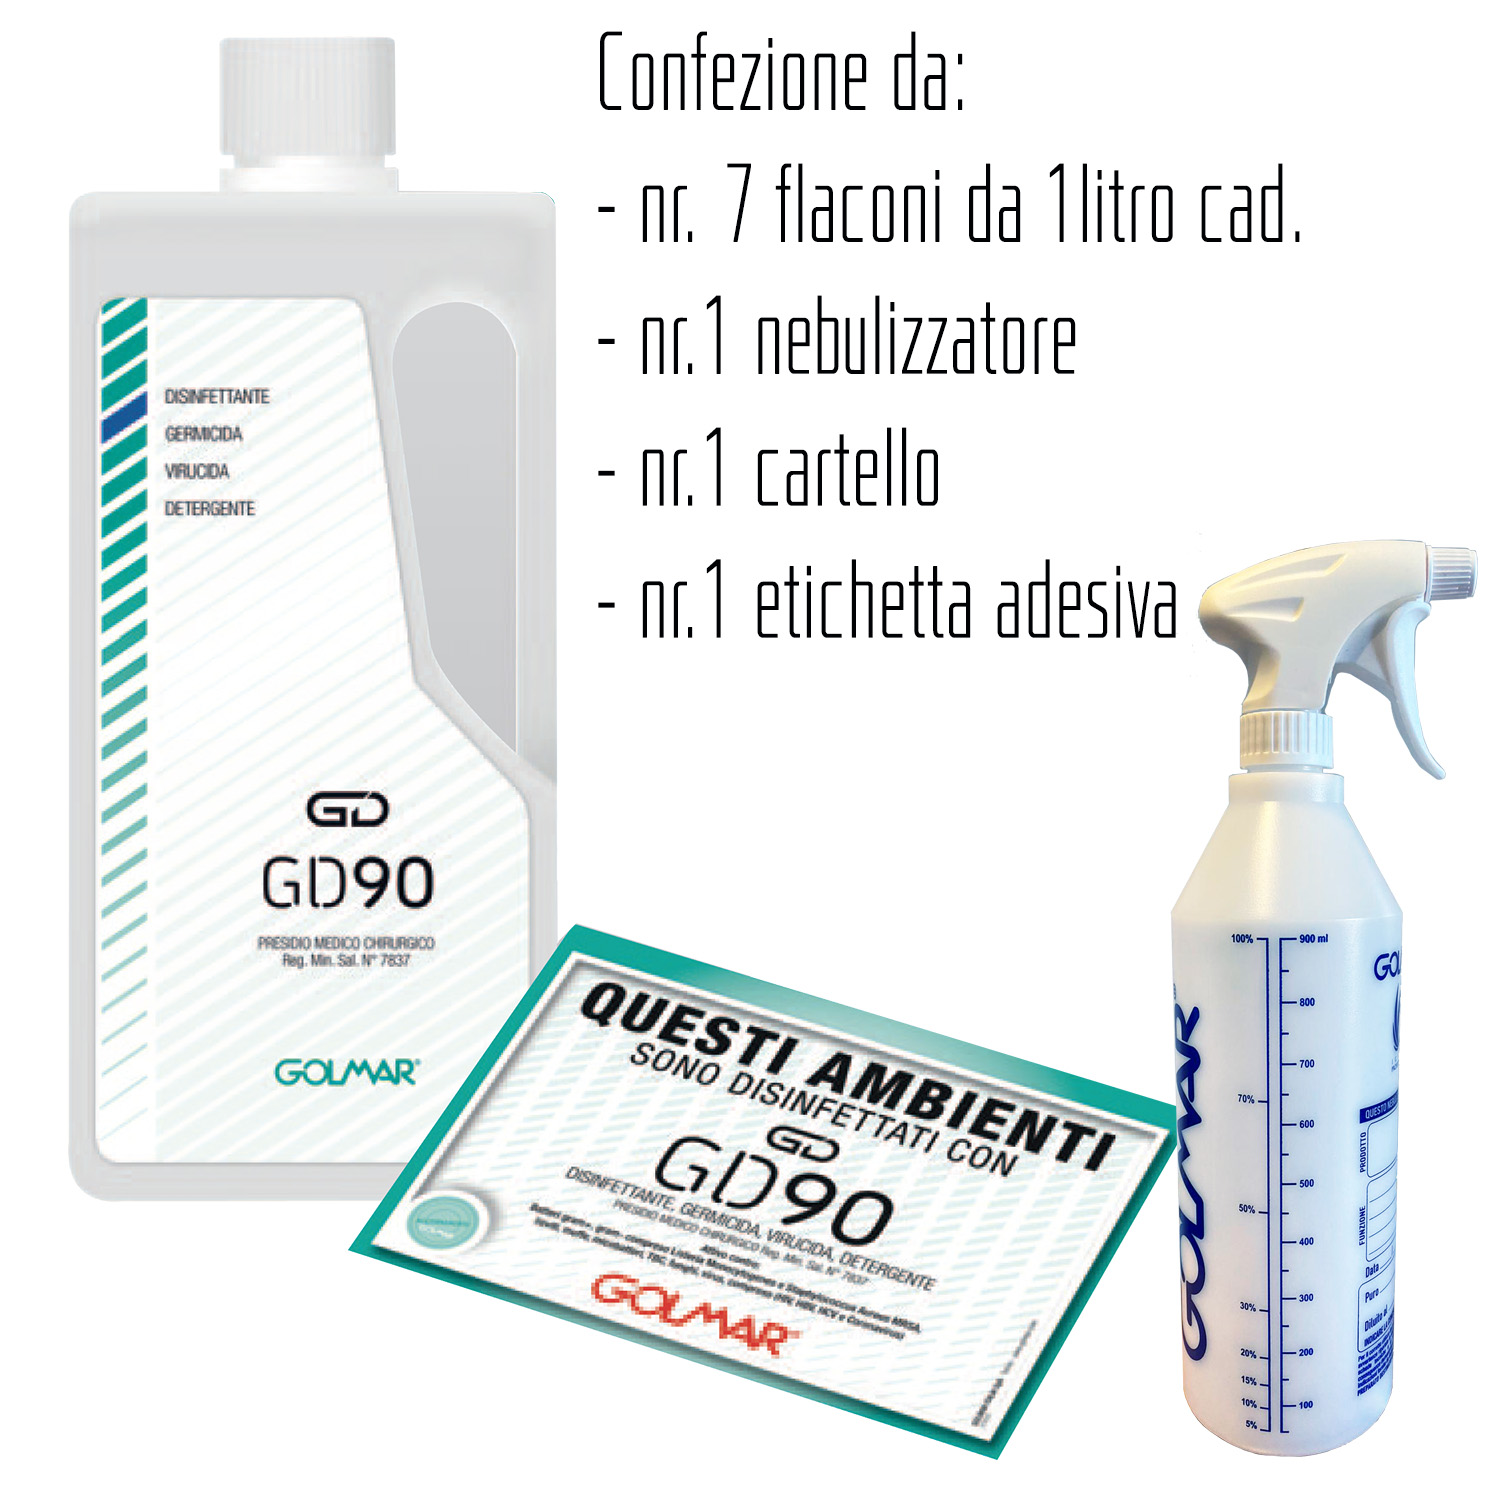 GD90 liquid 1 liter - Biocide - broad-spectrum professional disinfectant (effective against viruses, bacteria, yeasts and molds) - package with 7 bottles 1 liter, 1 trigger bottle.